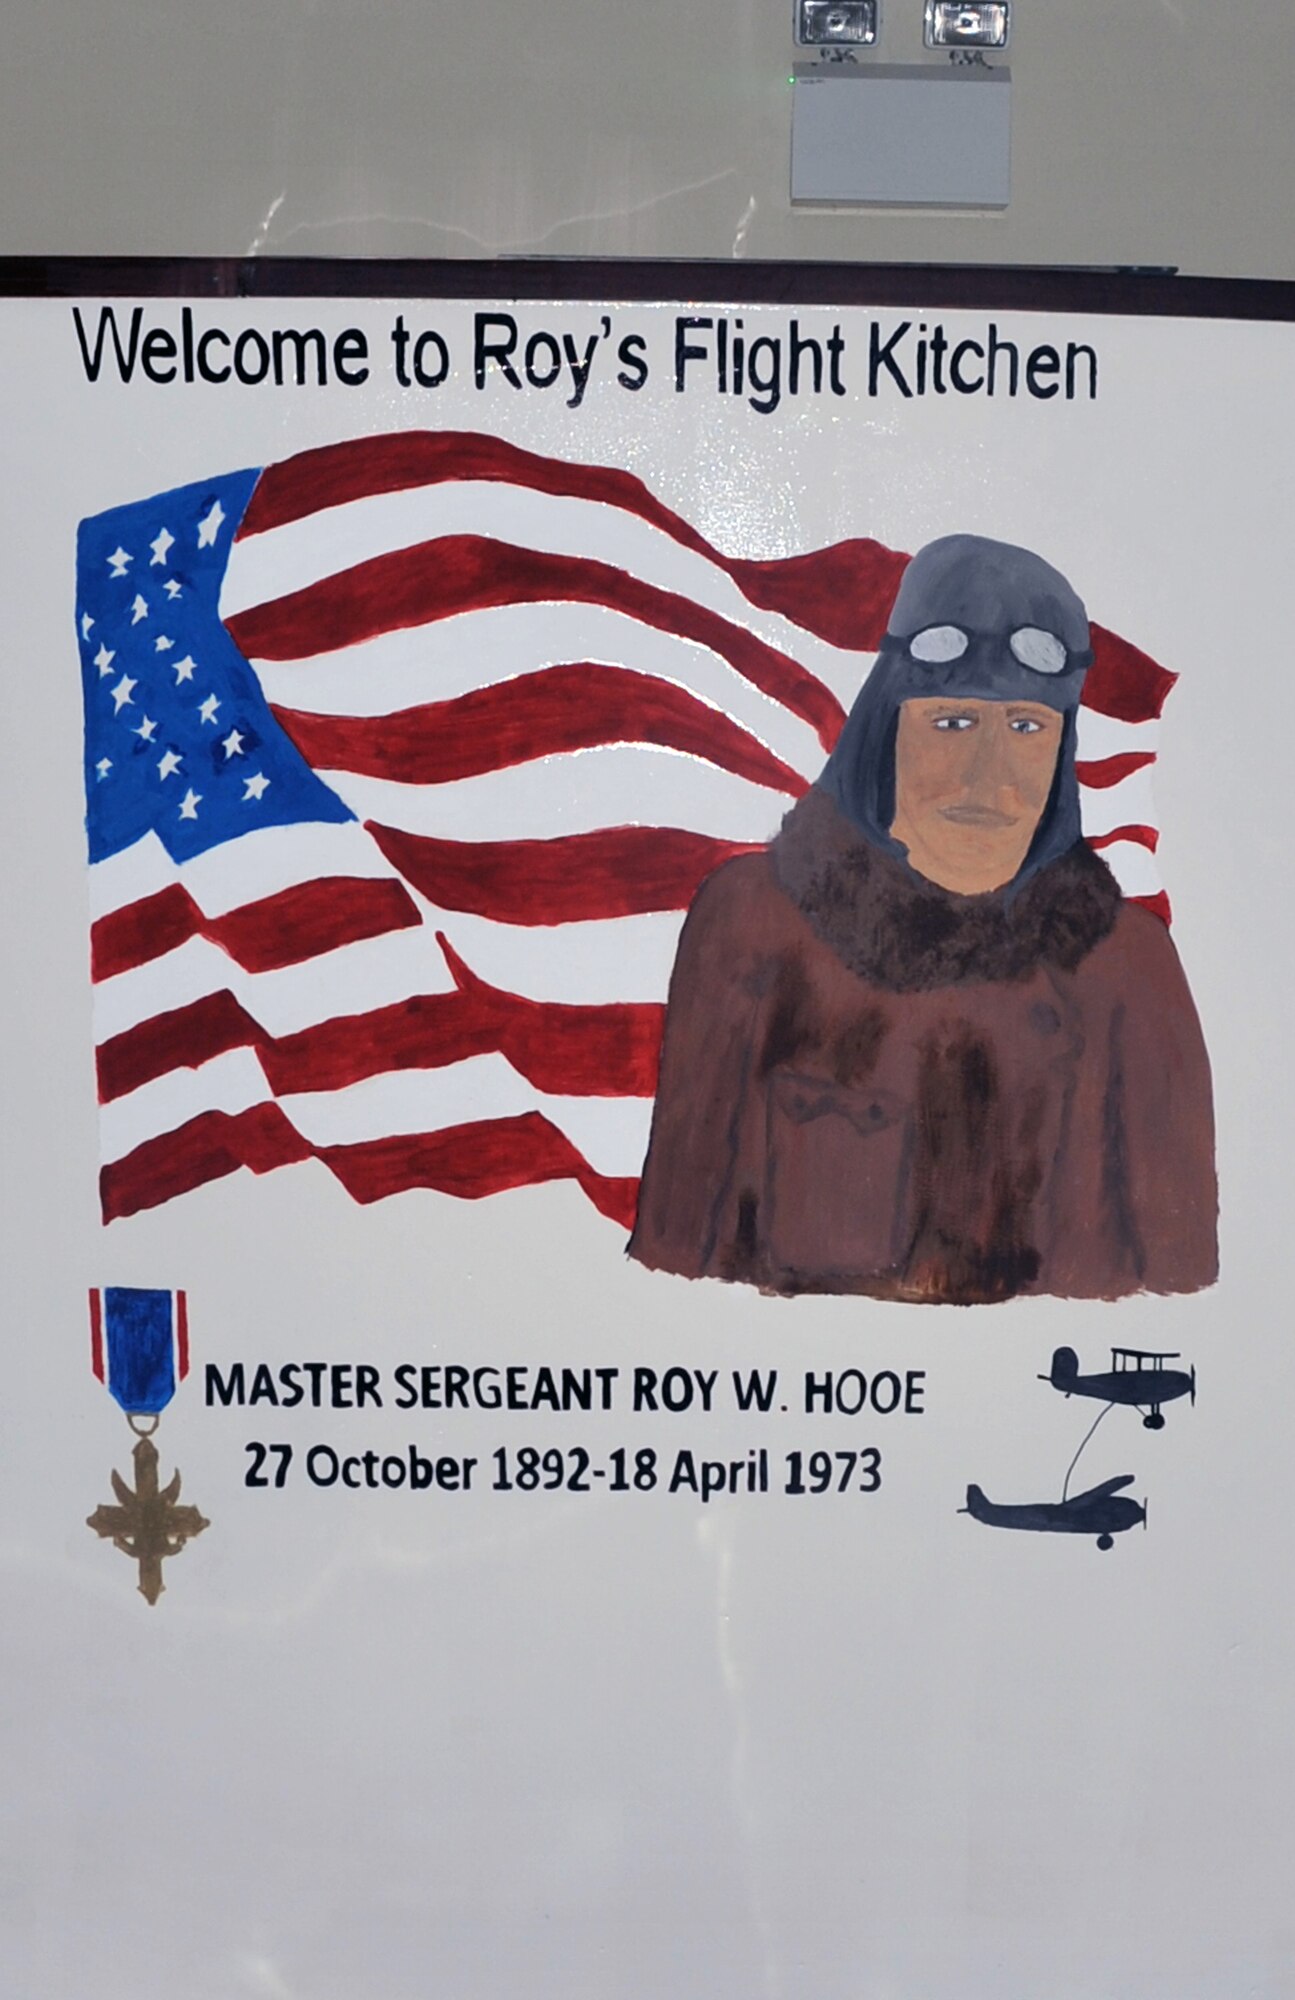 This is a photo of the mural painted in honor of Master Sgt. Roy Hooe at Roy's Flight Kitchen at the operations area of the 380th Air Expeditionary Wing at a non-disclosed base in Southwest Asia.  A 2001 inductee to the Airlift/Tanker Association Hall of Fame, Sergeant Hooe is most widely known for his work as an ?airborne mechanic? on the famed ?Question Mark? flight, according to AMC history. Sergeant?s Hooe?s famed flight was for 151 hours beginning on Jan. 1, 1929. Then Staff Sgt. Hooe was responsible for keeping the ?Question Mark? aloft during a record-setting endurance flight, which at one point required him to go outside the aircraft on a catwalk to make engine repairs. Airmen from the 380th Air Expeditionary Wing who coordinated and completed the mural include Master Scott Sturkol, Tech. Sgts. Johnette Chun and Bobby Ramos, and Senior Airmen Levar Kinard, Abdul Montaser and Priscilla Llanos. (U.S. Air Force Photo/Master Sgt. Scott T. Sturkol/Released)
